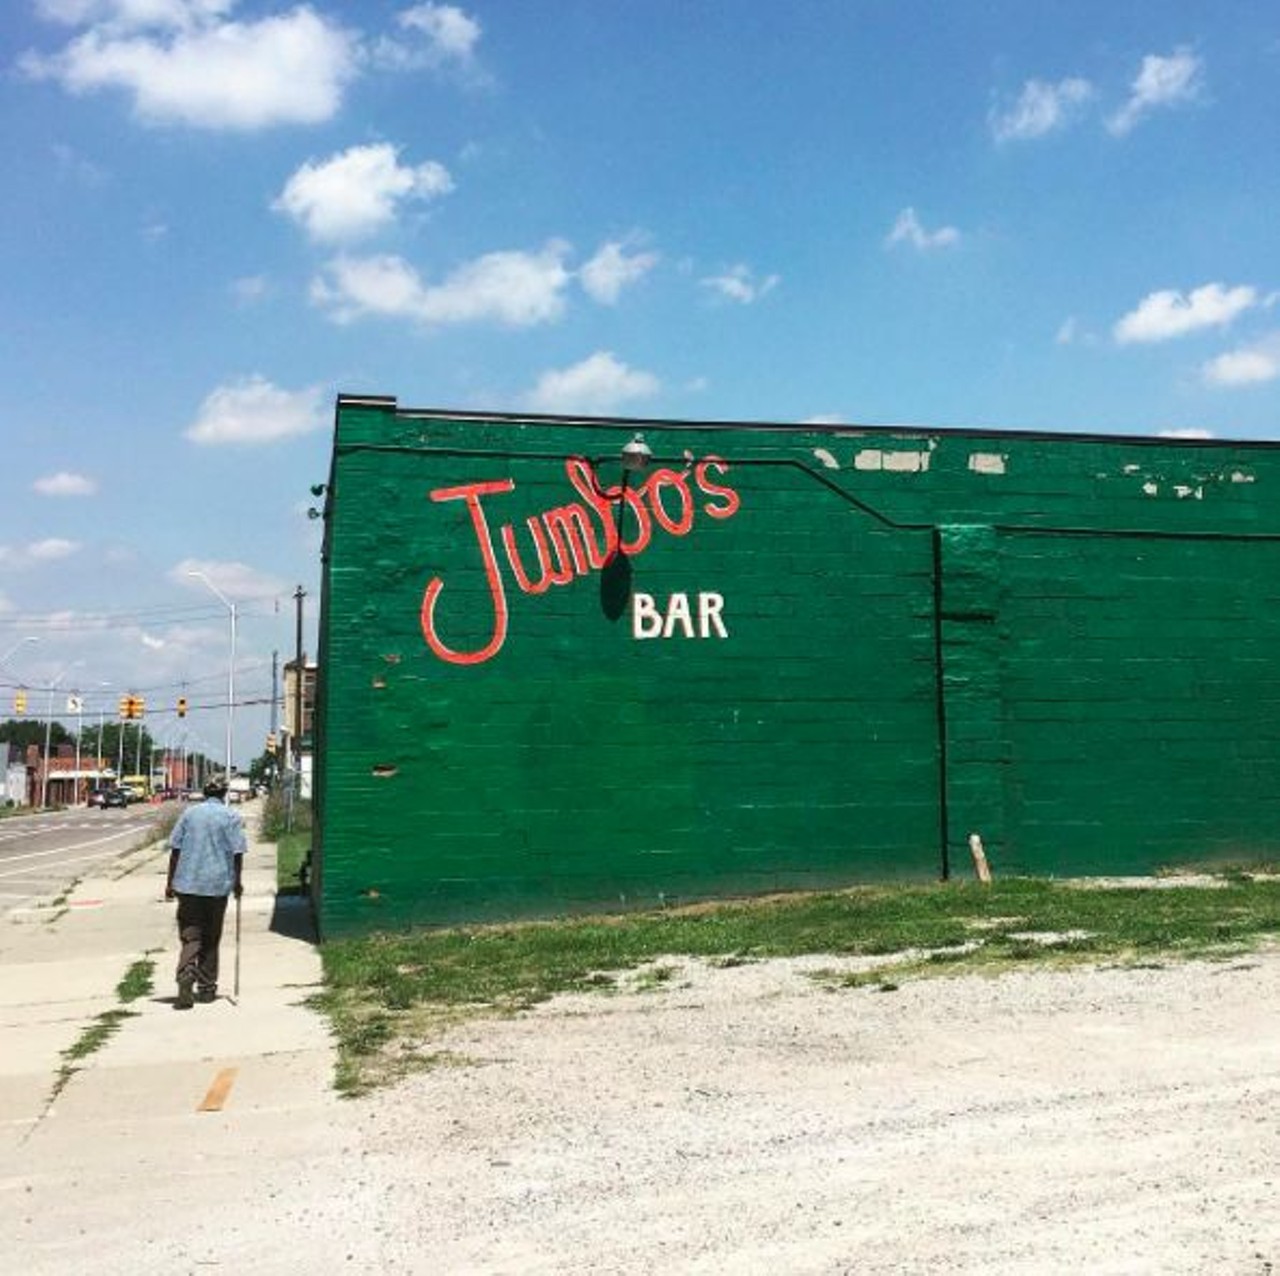 Jumbo's
3736 3rd St., Detroit, MI 48201
Though it has yet to be proven by science, we&#146;re pretty sure Jumbo&#146;s invented fun. The Cass Corridor dive bar has likely been around longer than you have, but it has yet to lose its sense of whimsy (the cheap drinks certainly contribute). After you buy your $2.50 Stroh&#146;s, you&#146;re sure to find fellow dog-lovers at the patio.
Photo via IG user @once_over_twice